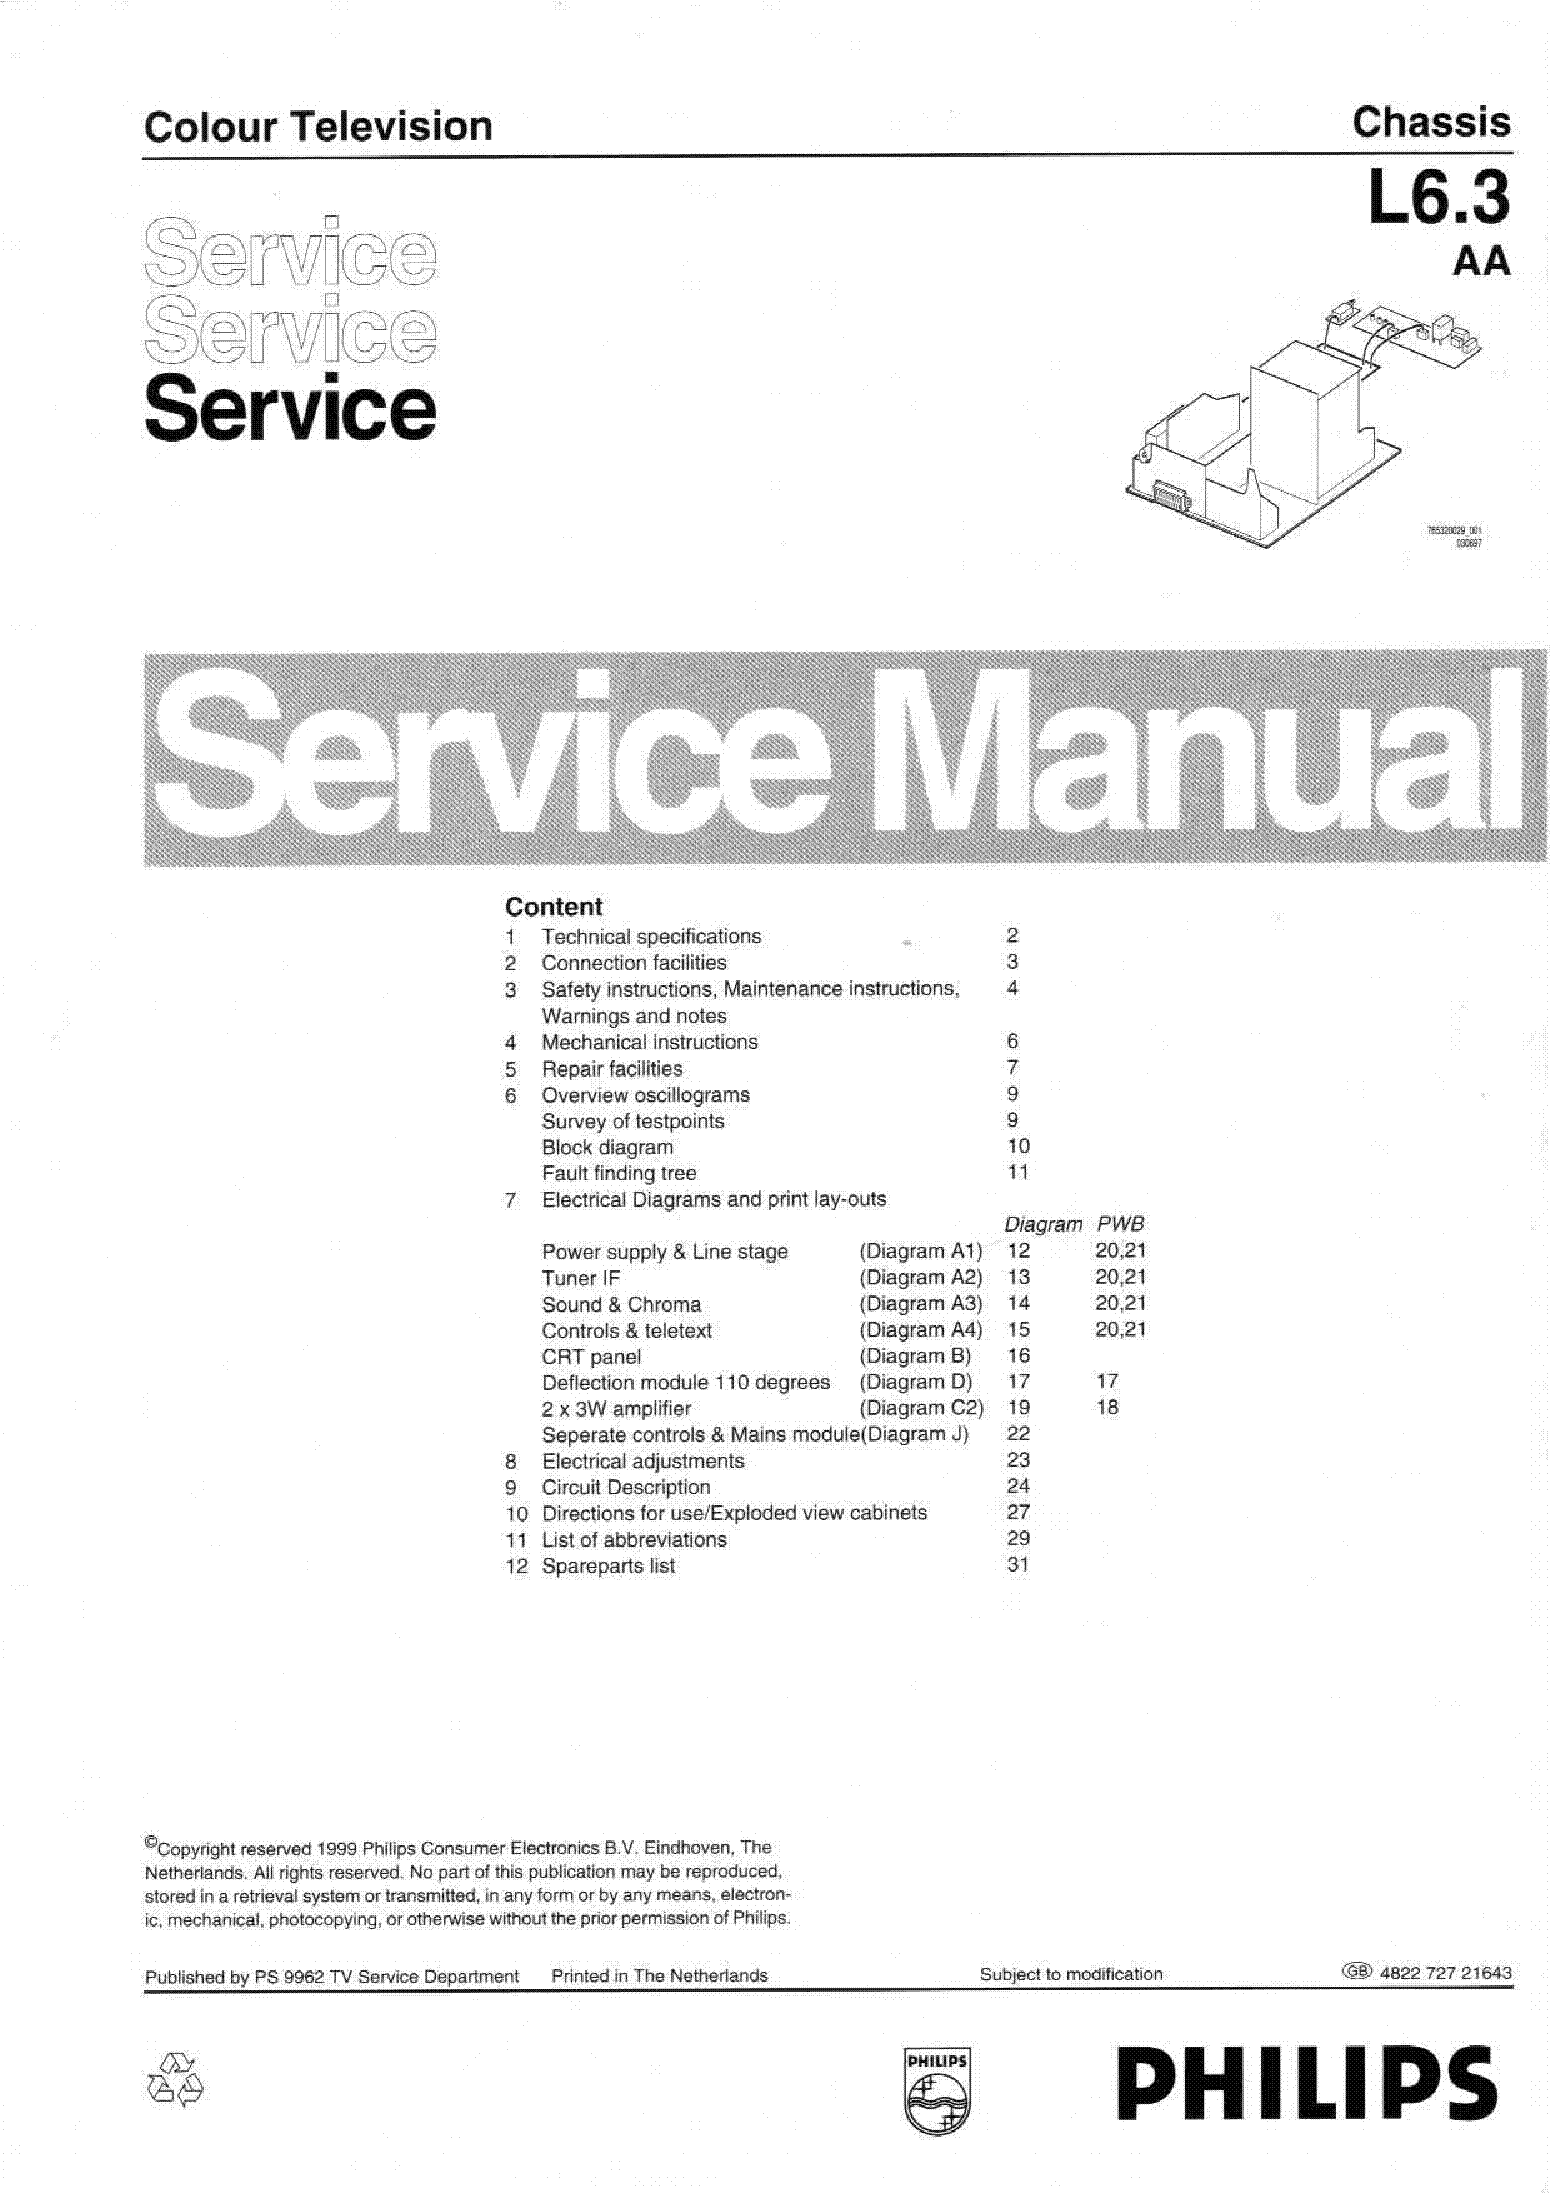 PHILIPS CH L6.3 AA service manual (1st page)